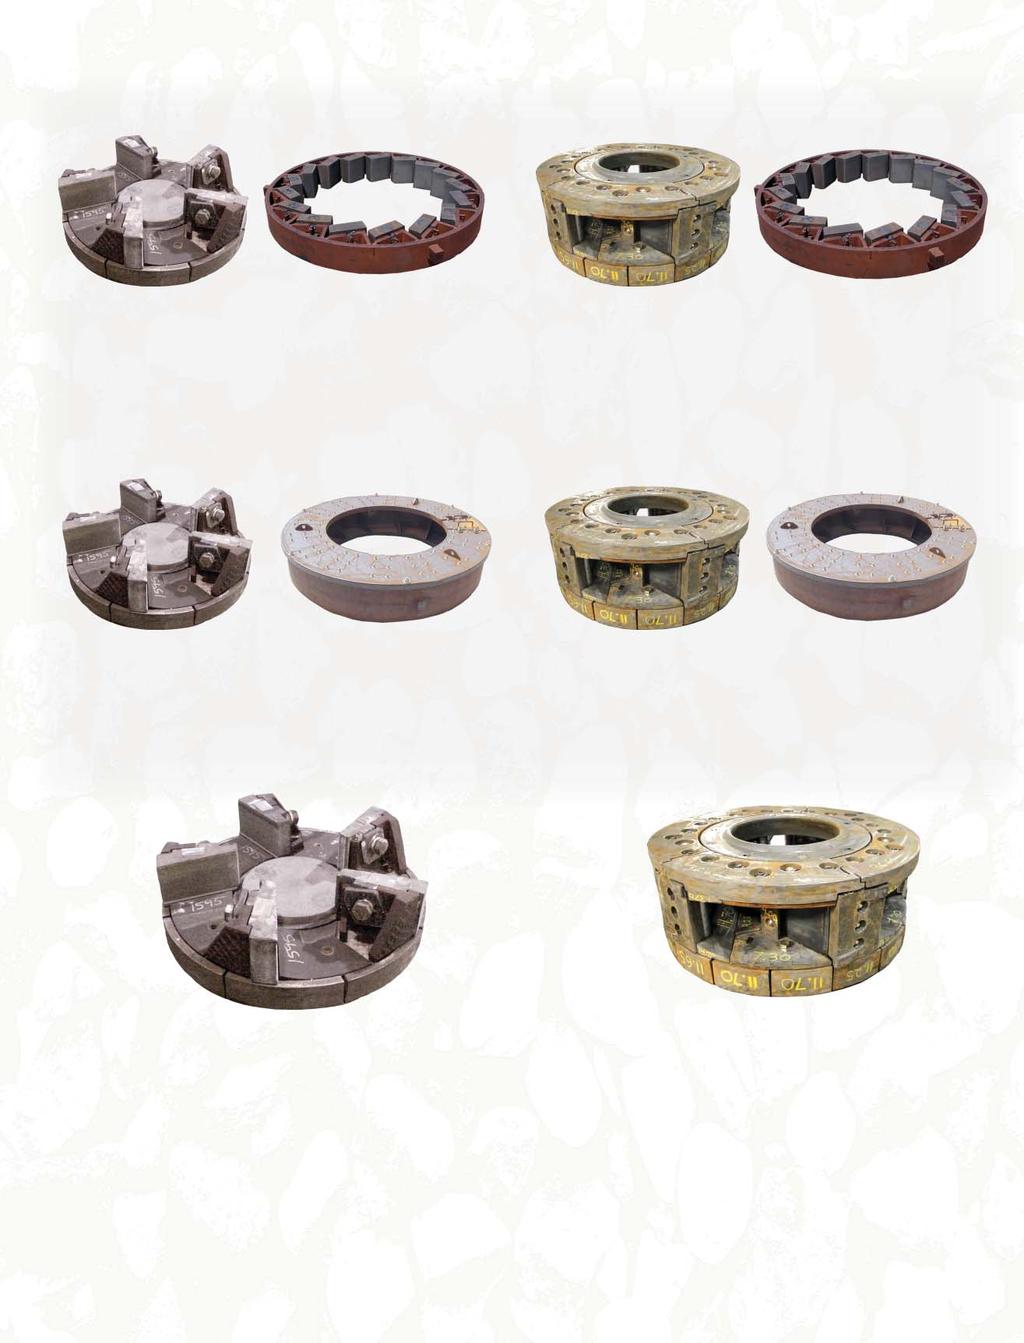 Possible Internal Configuration Options Shoe Table / Anvil Ring Superchipper TM / Anvil Ring Medium range friable material; Medium to low abrasion material; Low to Medium recirculating load; Good